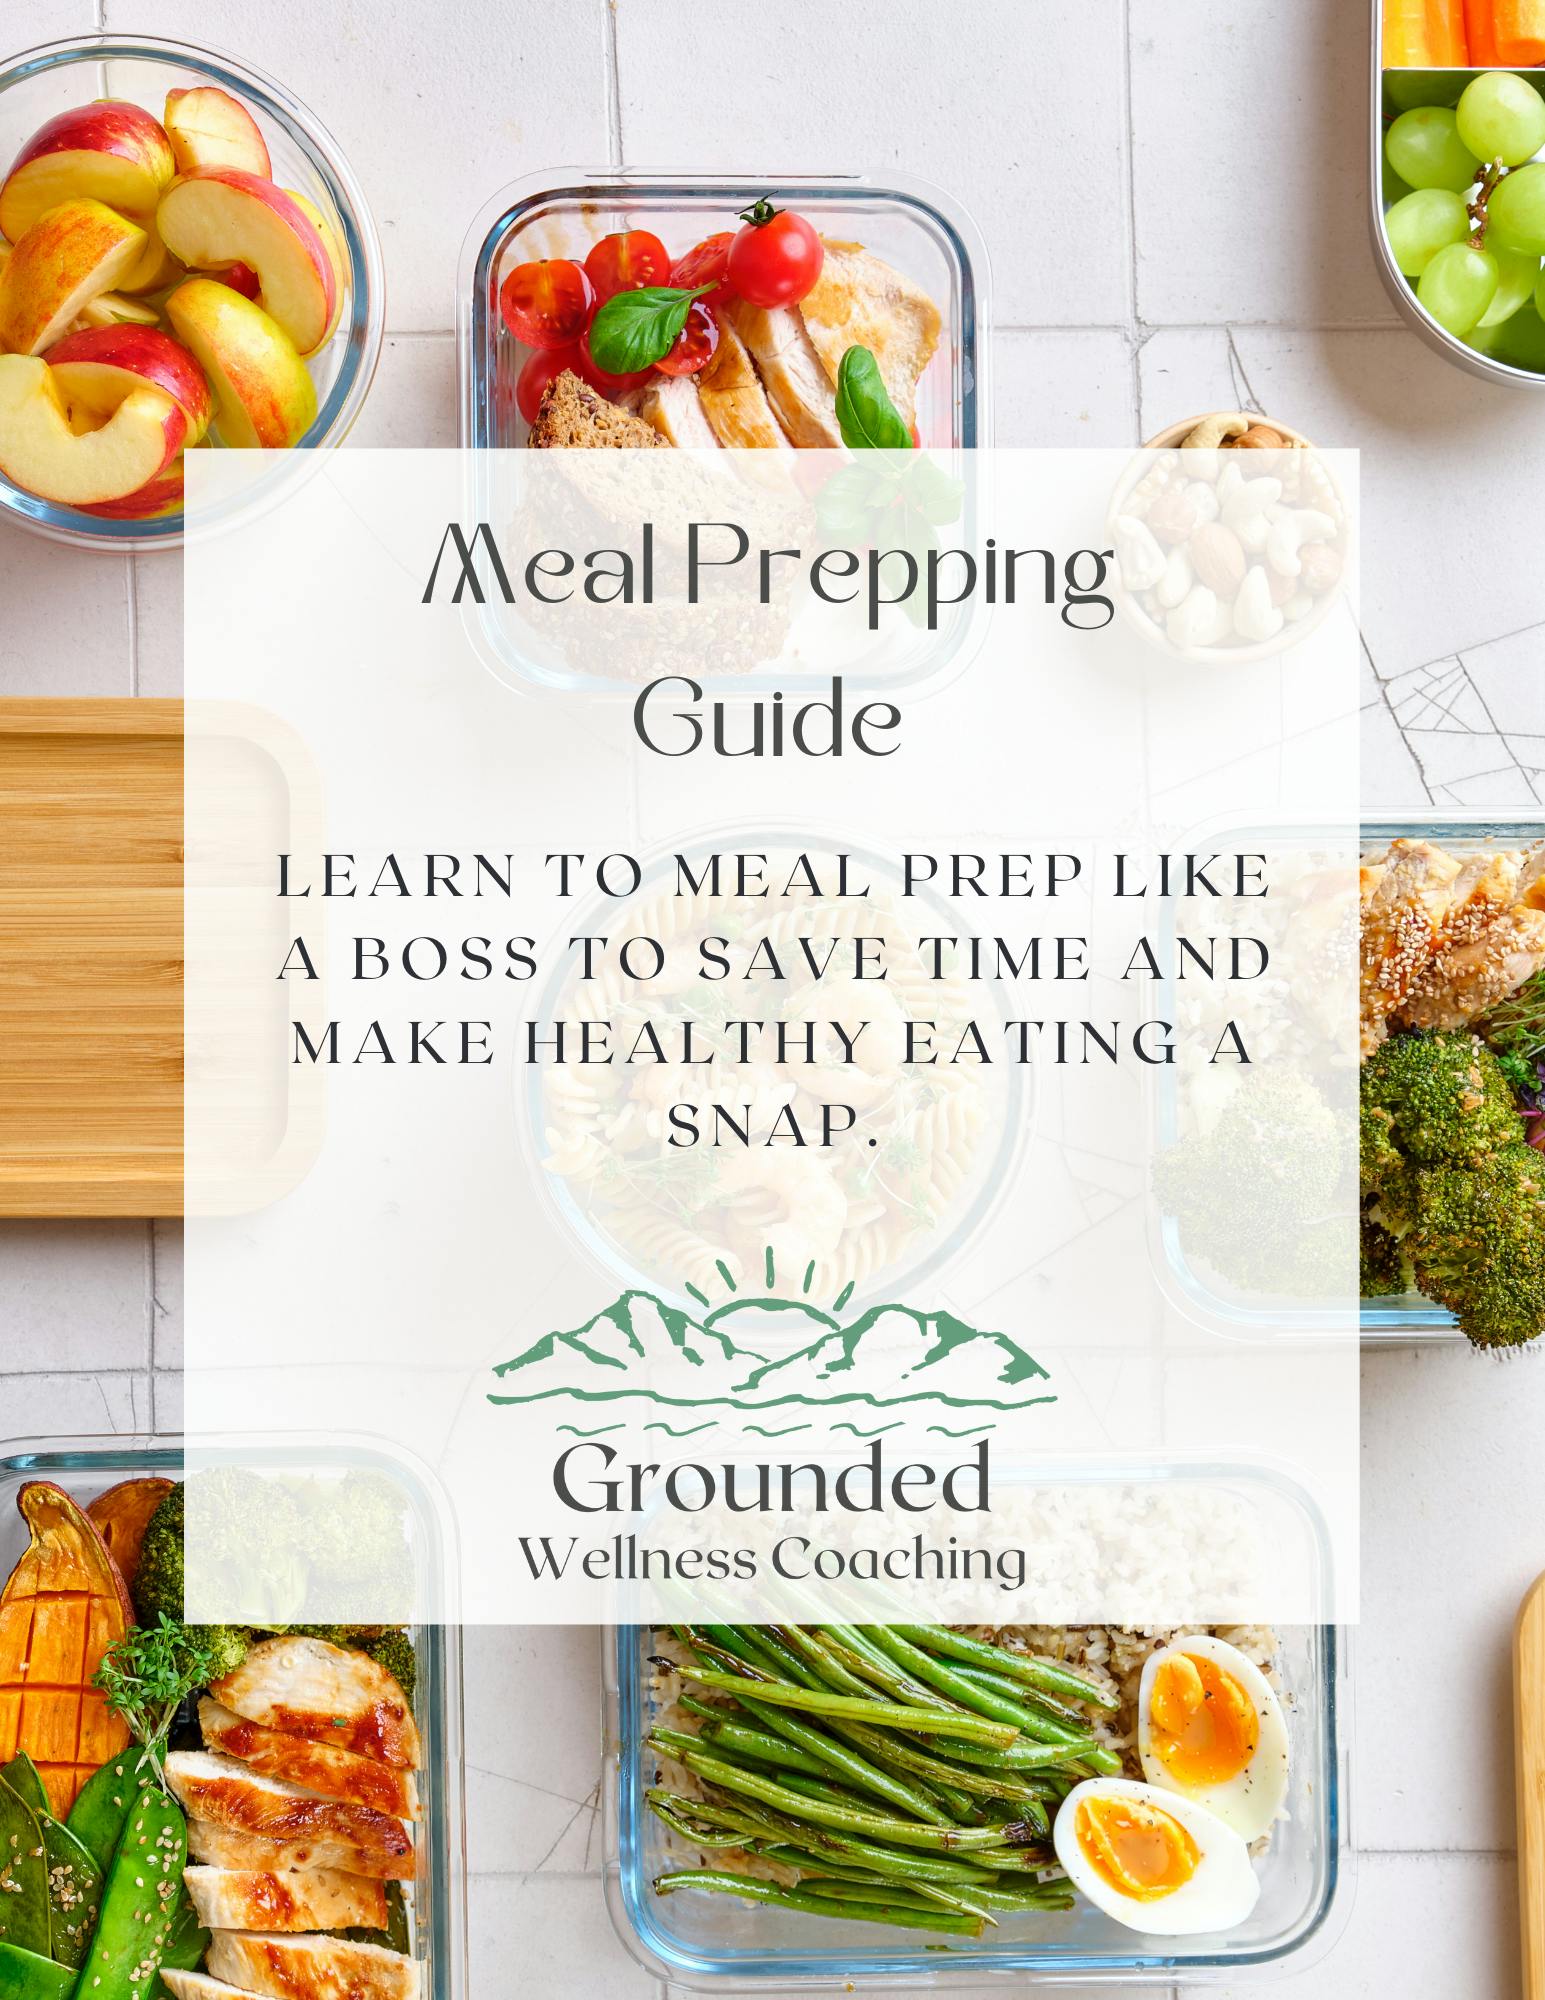 Meal Prepping Guide